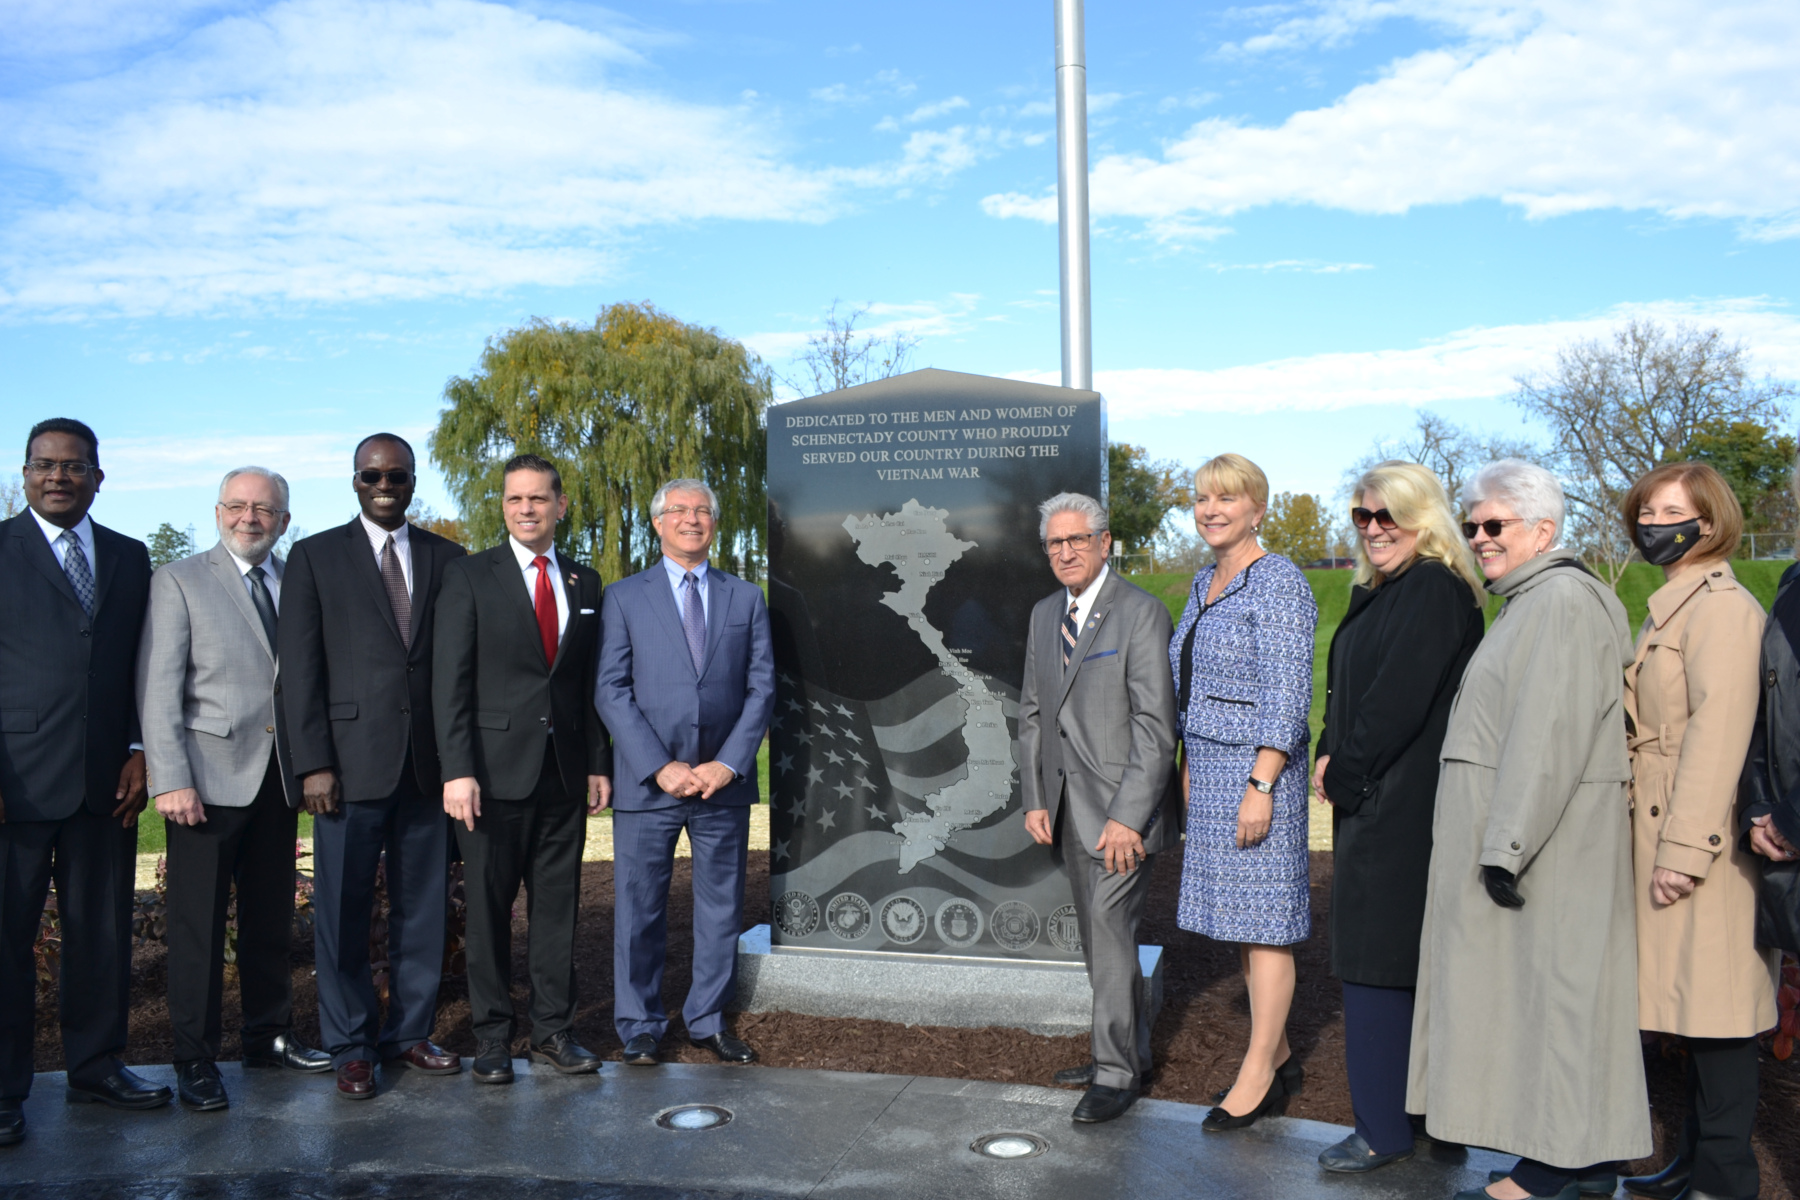 City/county elected officials and other elected officials in front of memorial